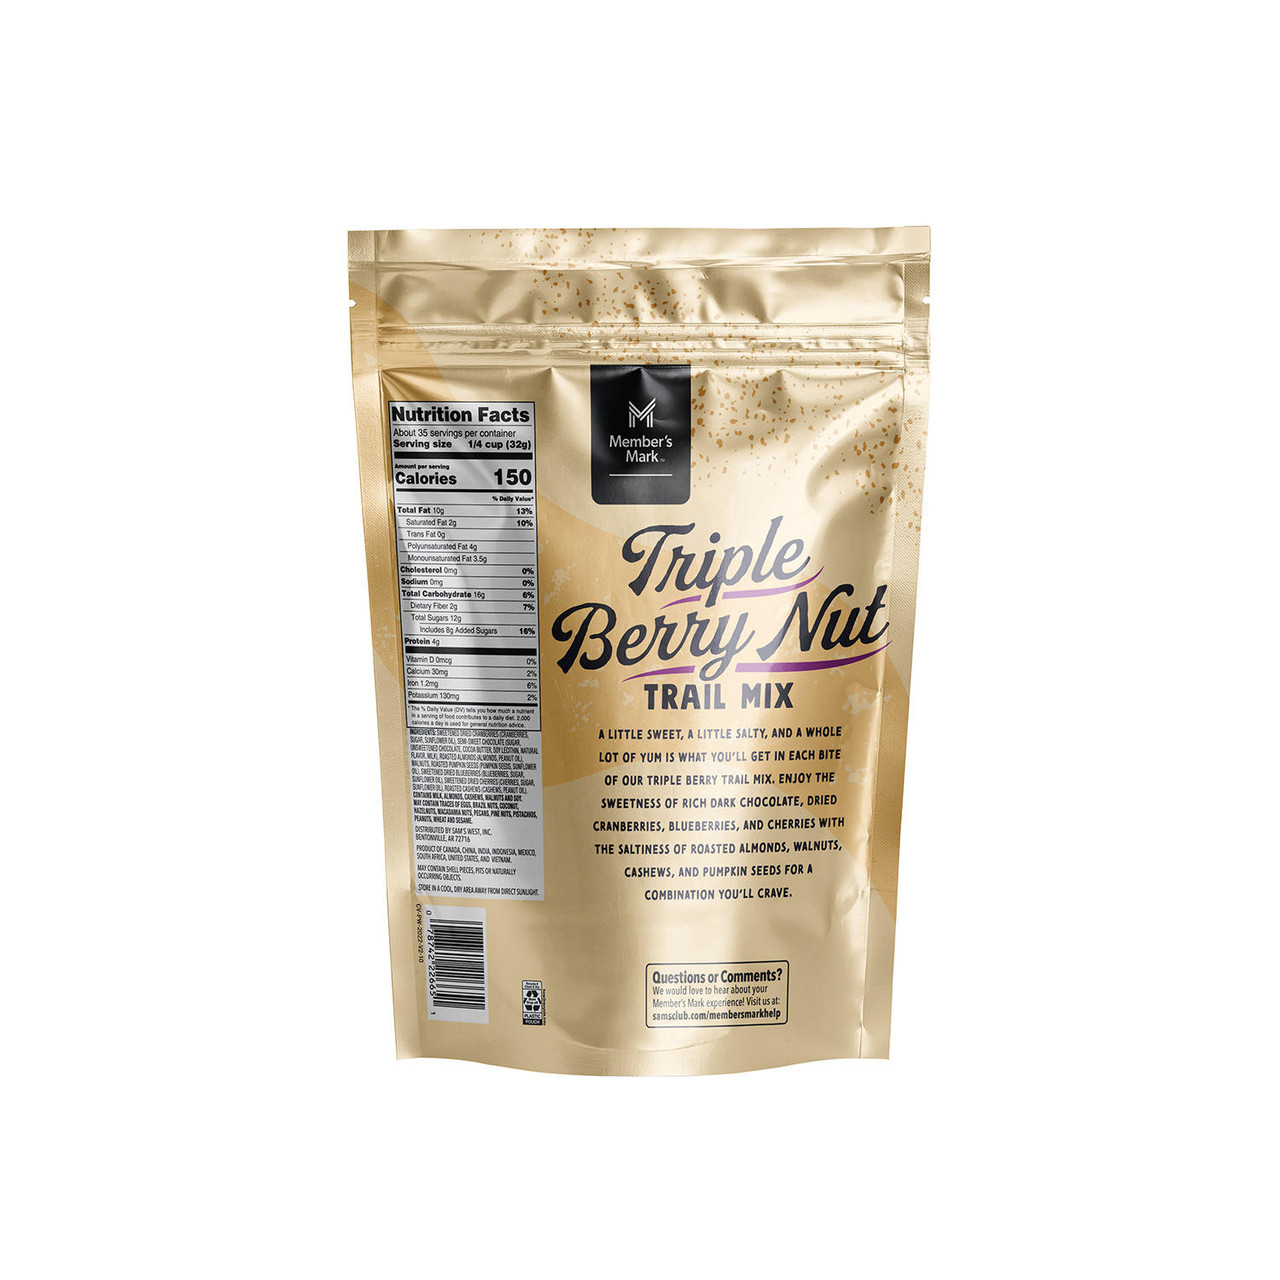 Member's Mark Triple Berry Nut Trail Mix (40 oz.) - [From 53.00 - Choose pk Qty ] - *Ships from Miami